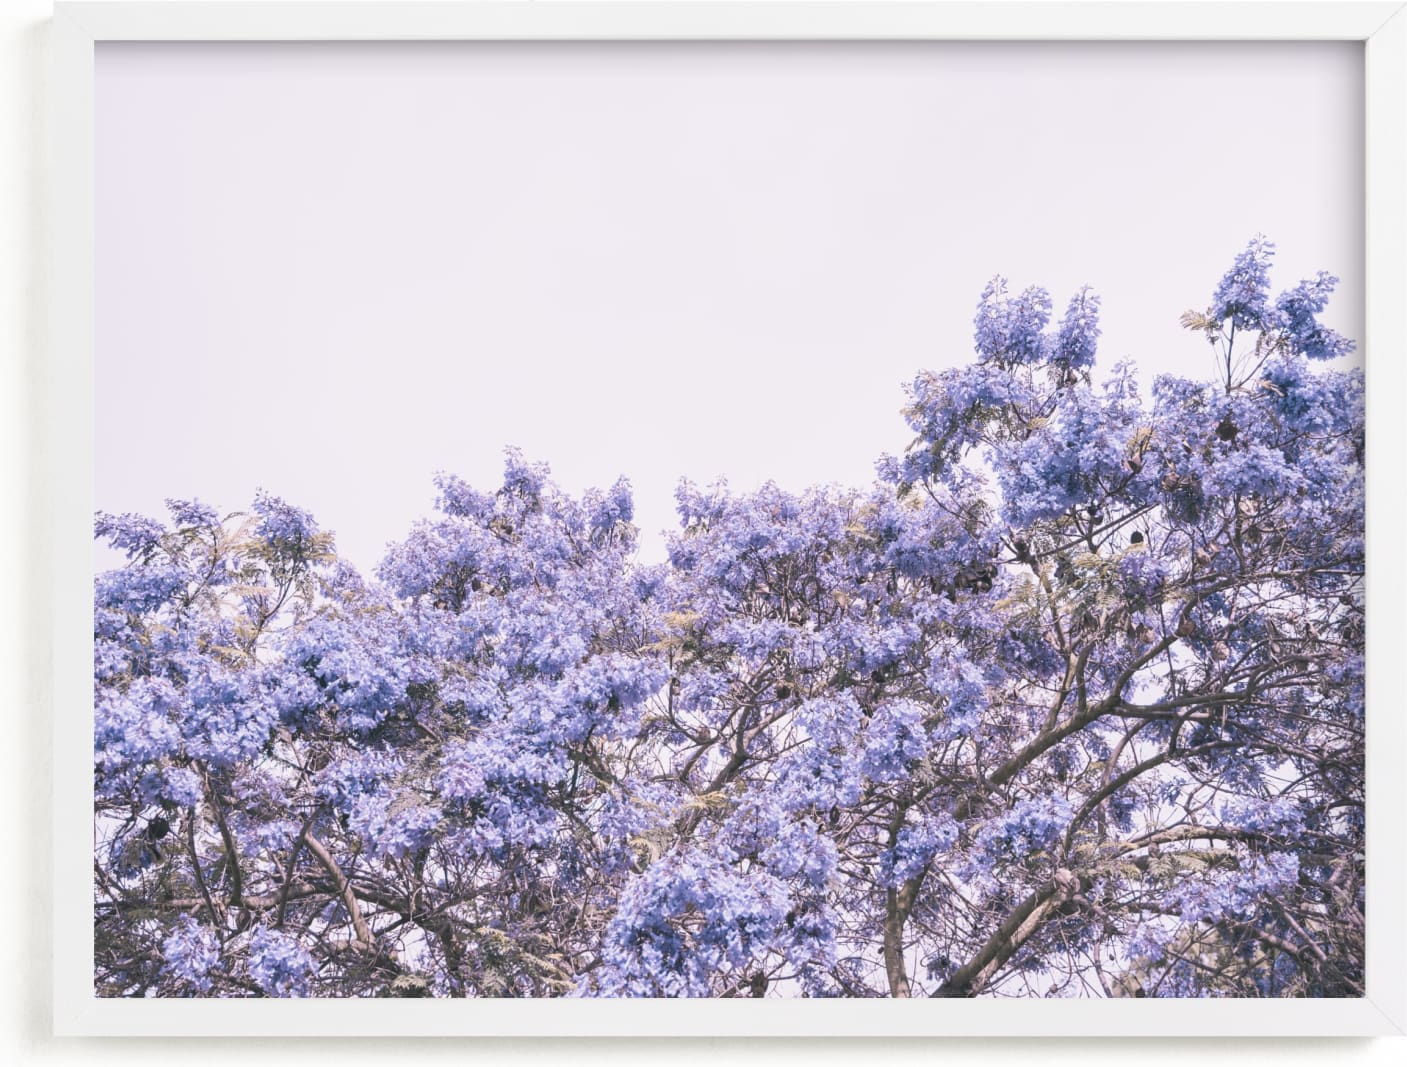 This is a purple art by Owl and Toad called Jacaranda in bloom.